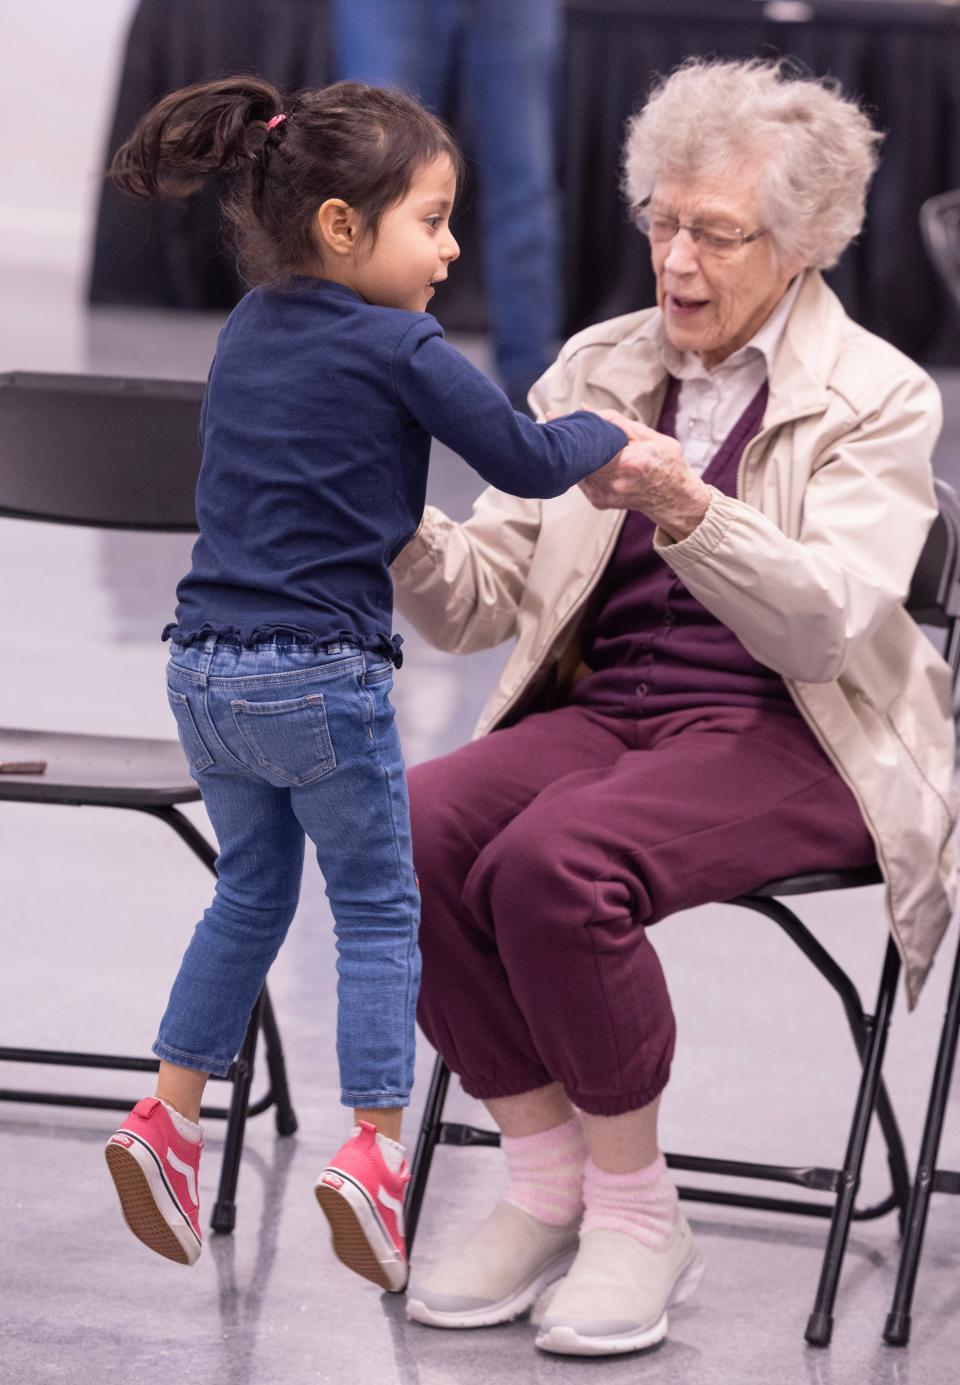 Stephanie Gutierrez, 5, dances with Rosemary Triplett during an Artful Living and Learning intergenerational class at the Massillon Museum.